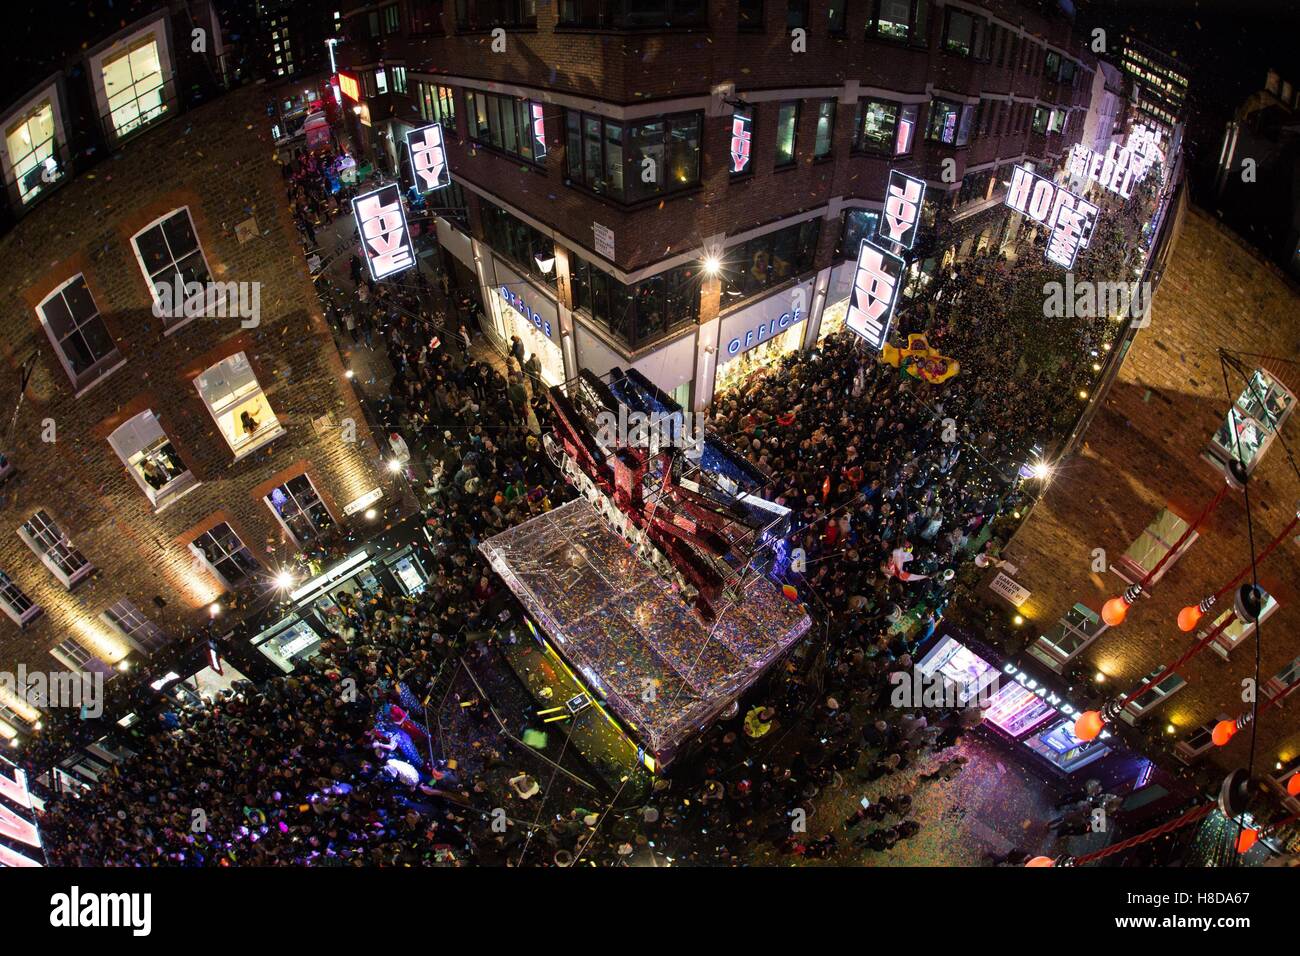 EDITORIAL USE ONLY Crowds gather for the Carnaby Christmas lights switch-on in Carnaby Street, London, in collaboration with the V&A and elrow, celebrating the heritage of Carnaby's fashion and cultural revolutions since the late 1960s. Stock Photo